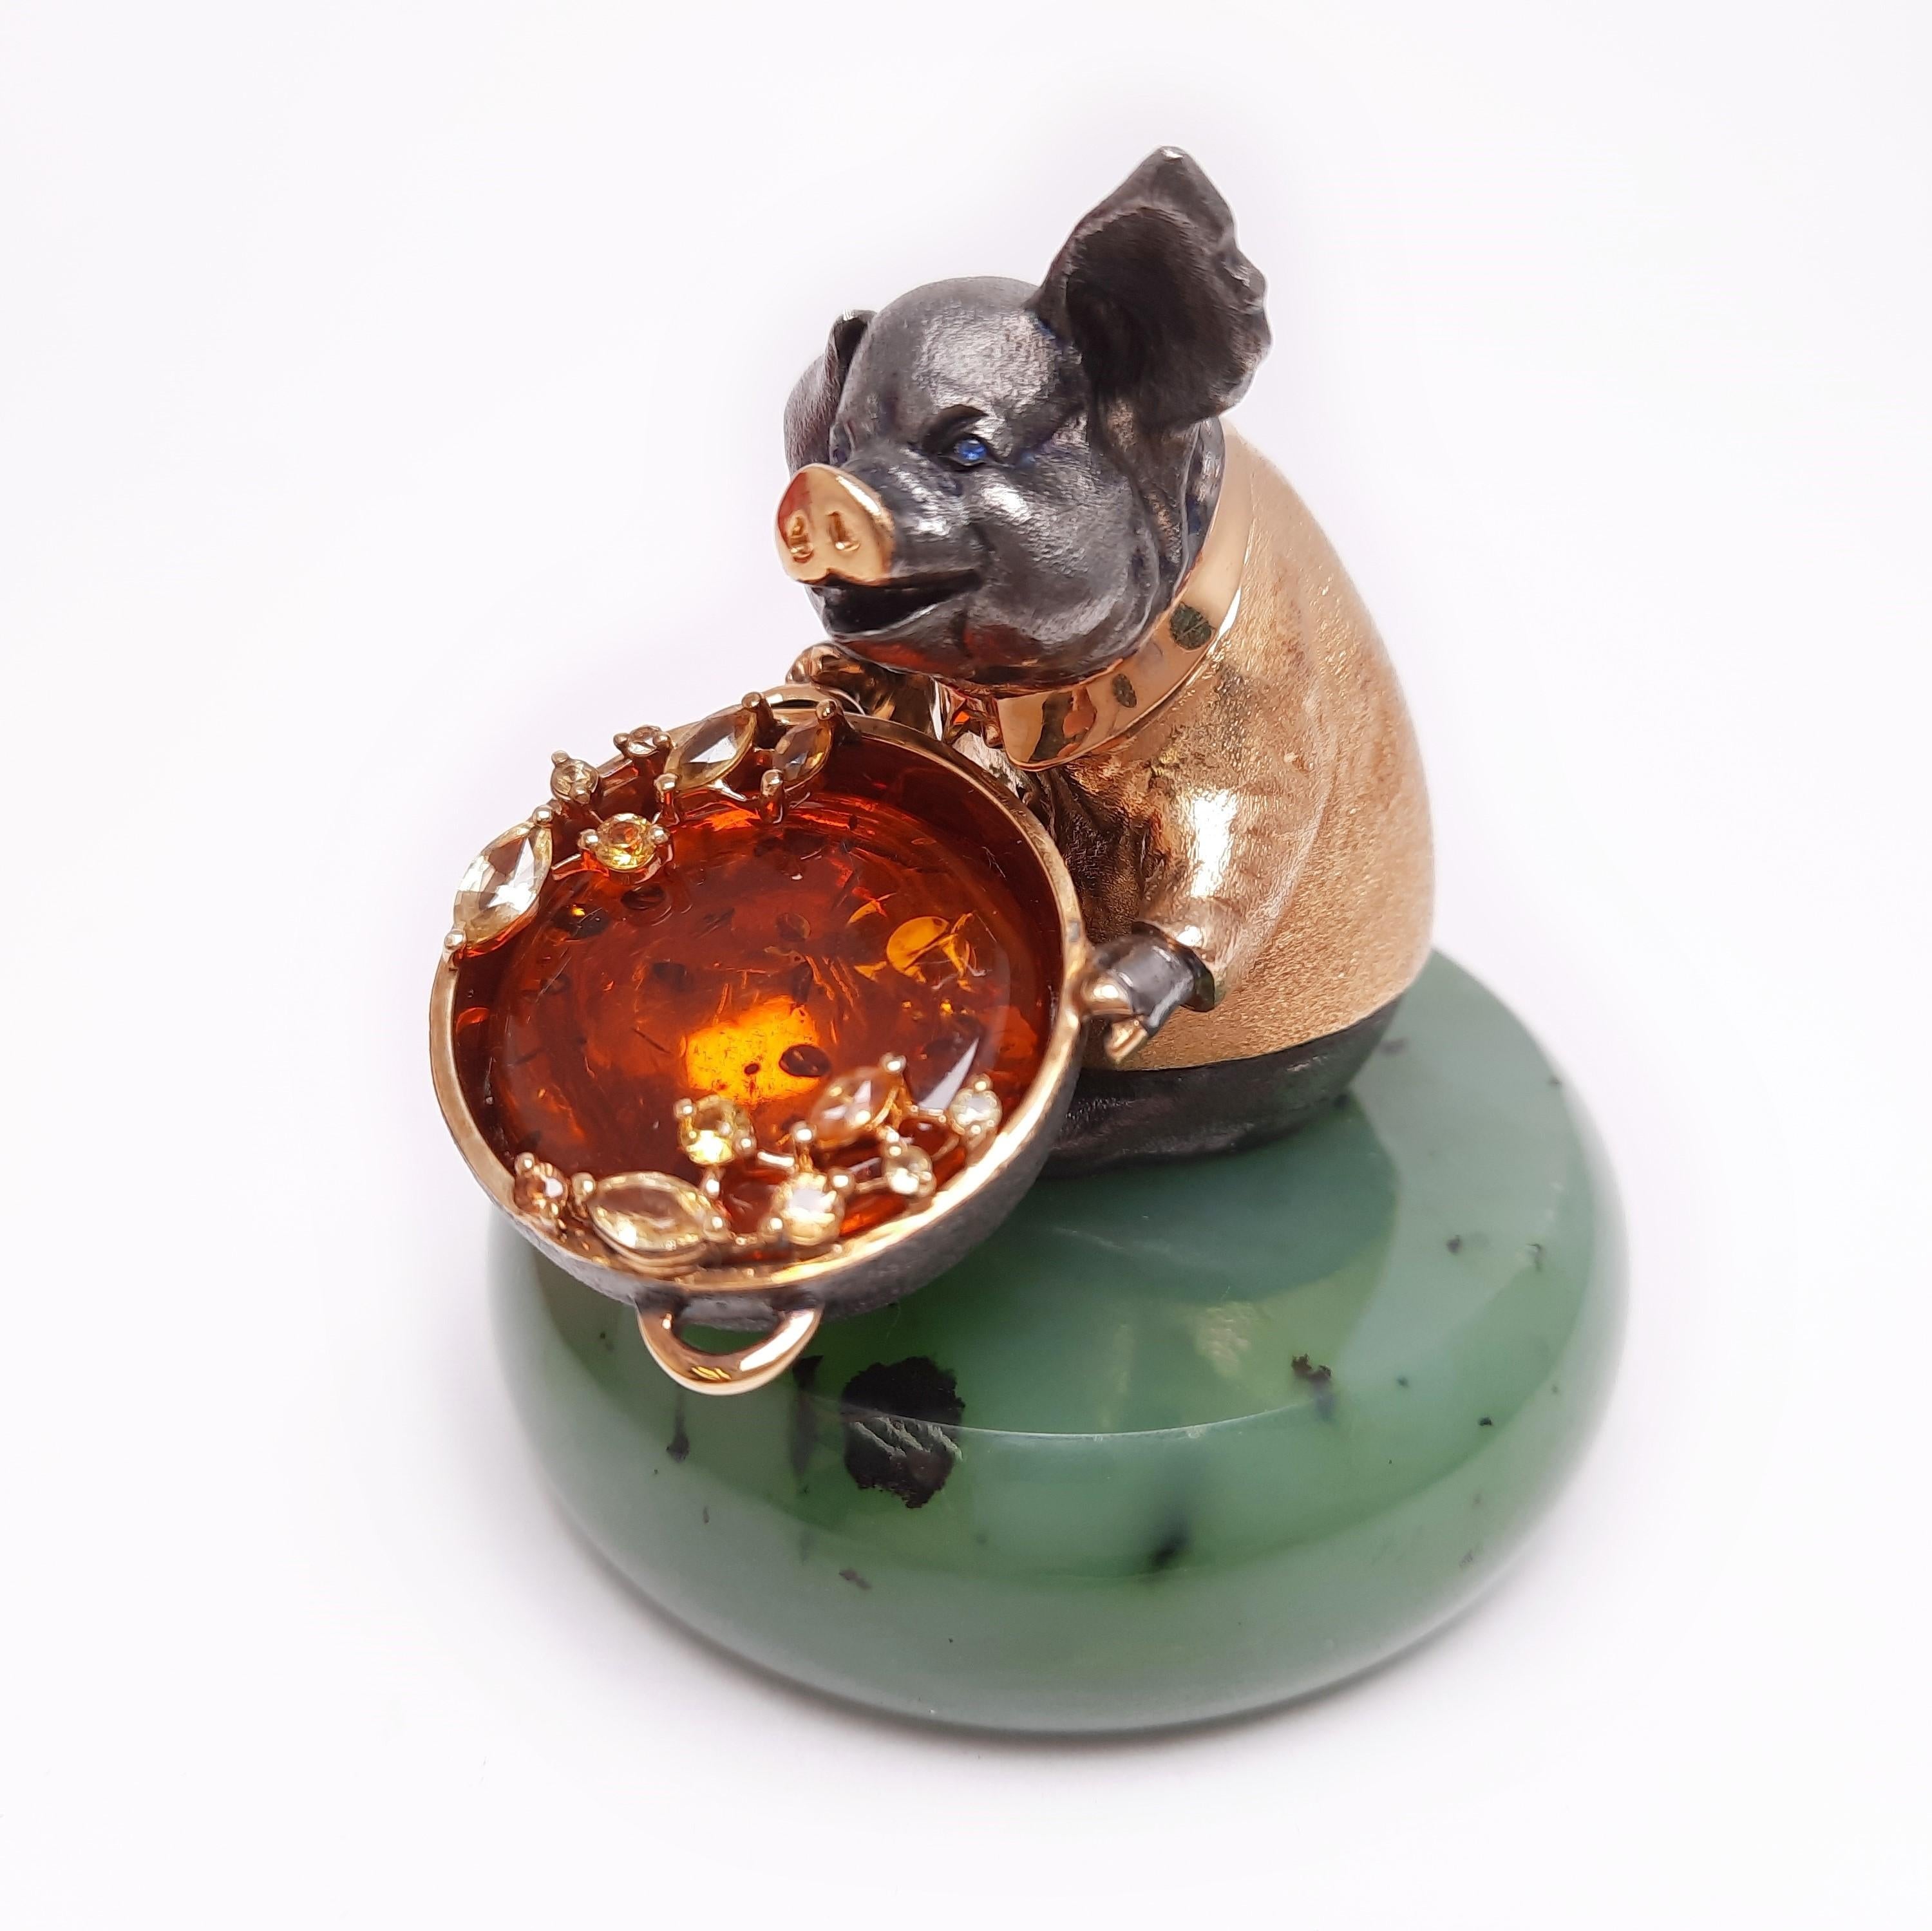 A pig, a symbol of fertility and abundance, was made into a silver miniature with a creative idea and masterful craftsmanship. A genuine silver pig has lively facial features with sapphire eyes and cooks a hotpot for family and friends. Inside the